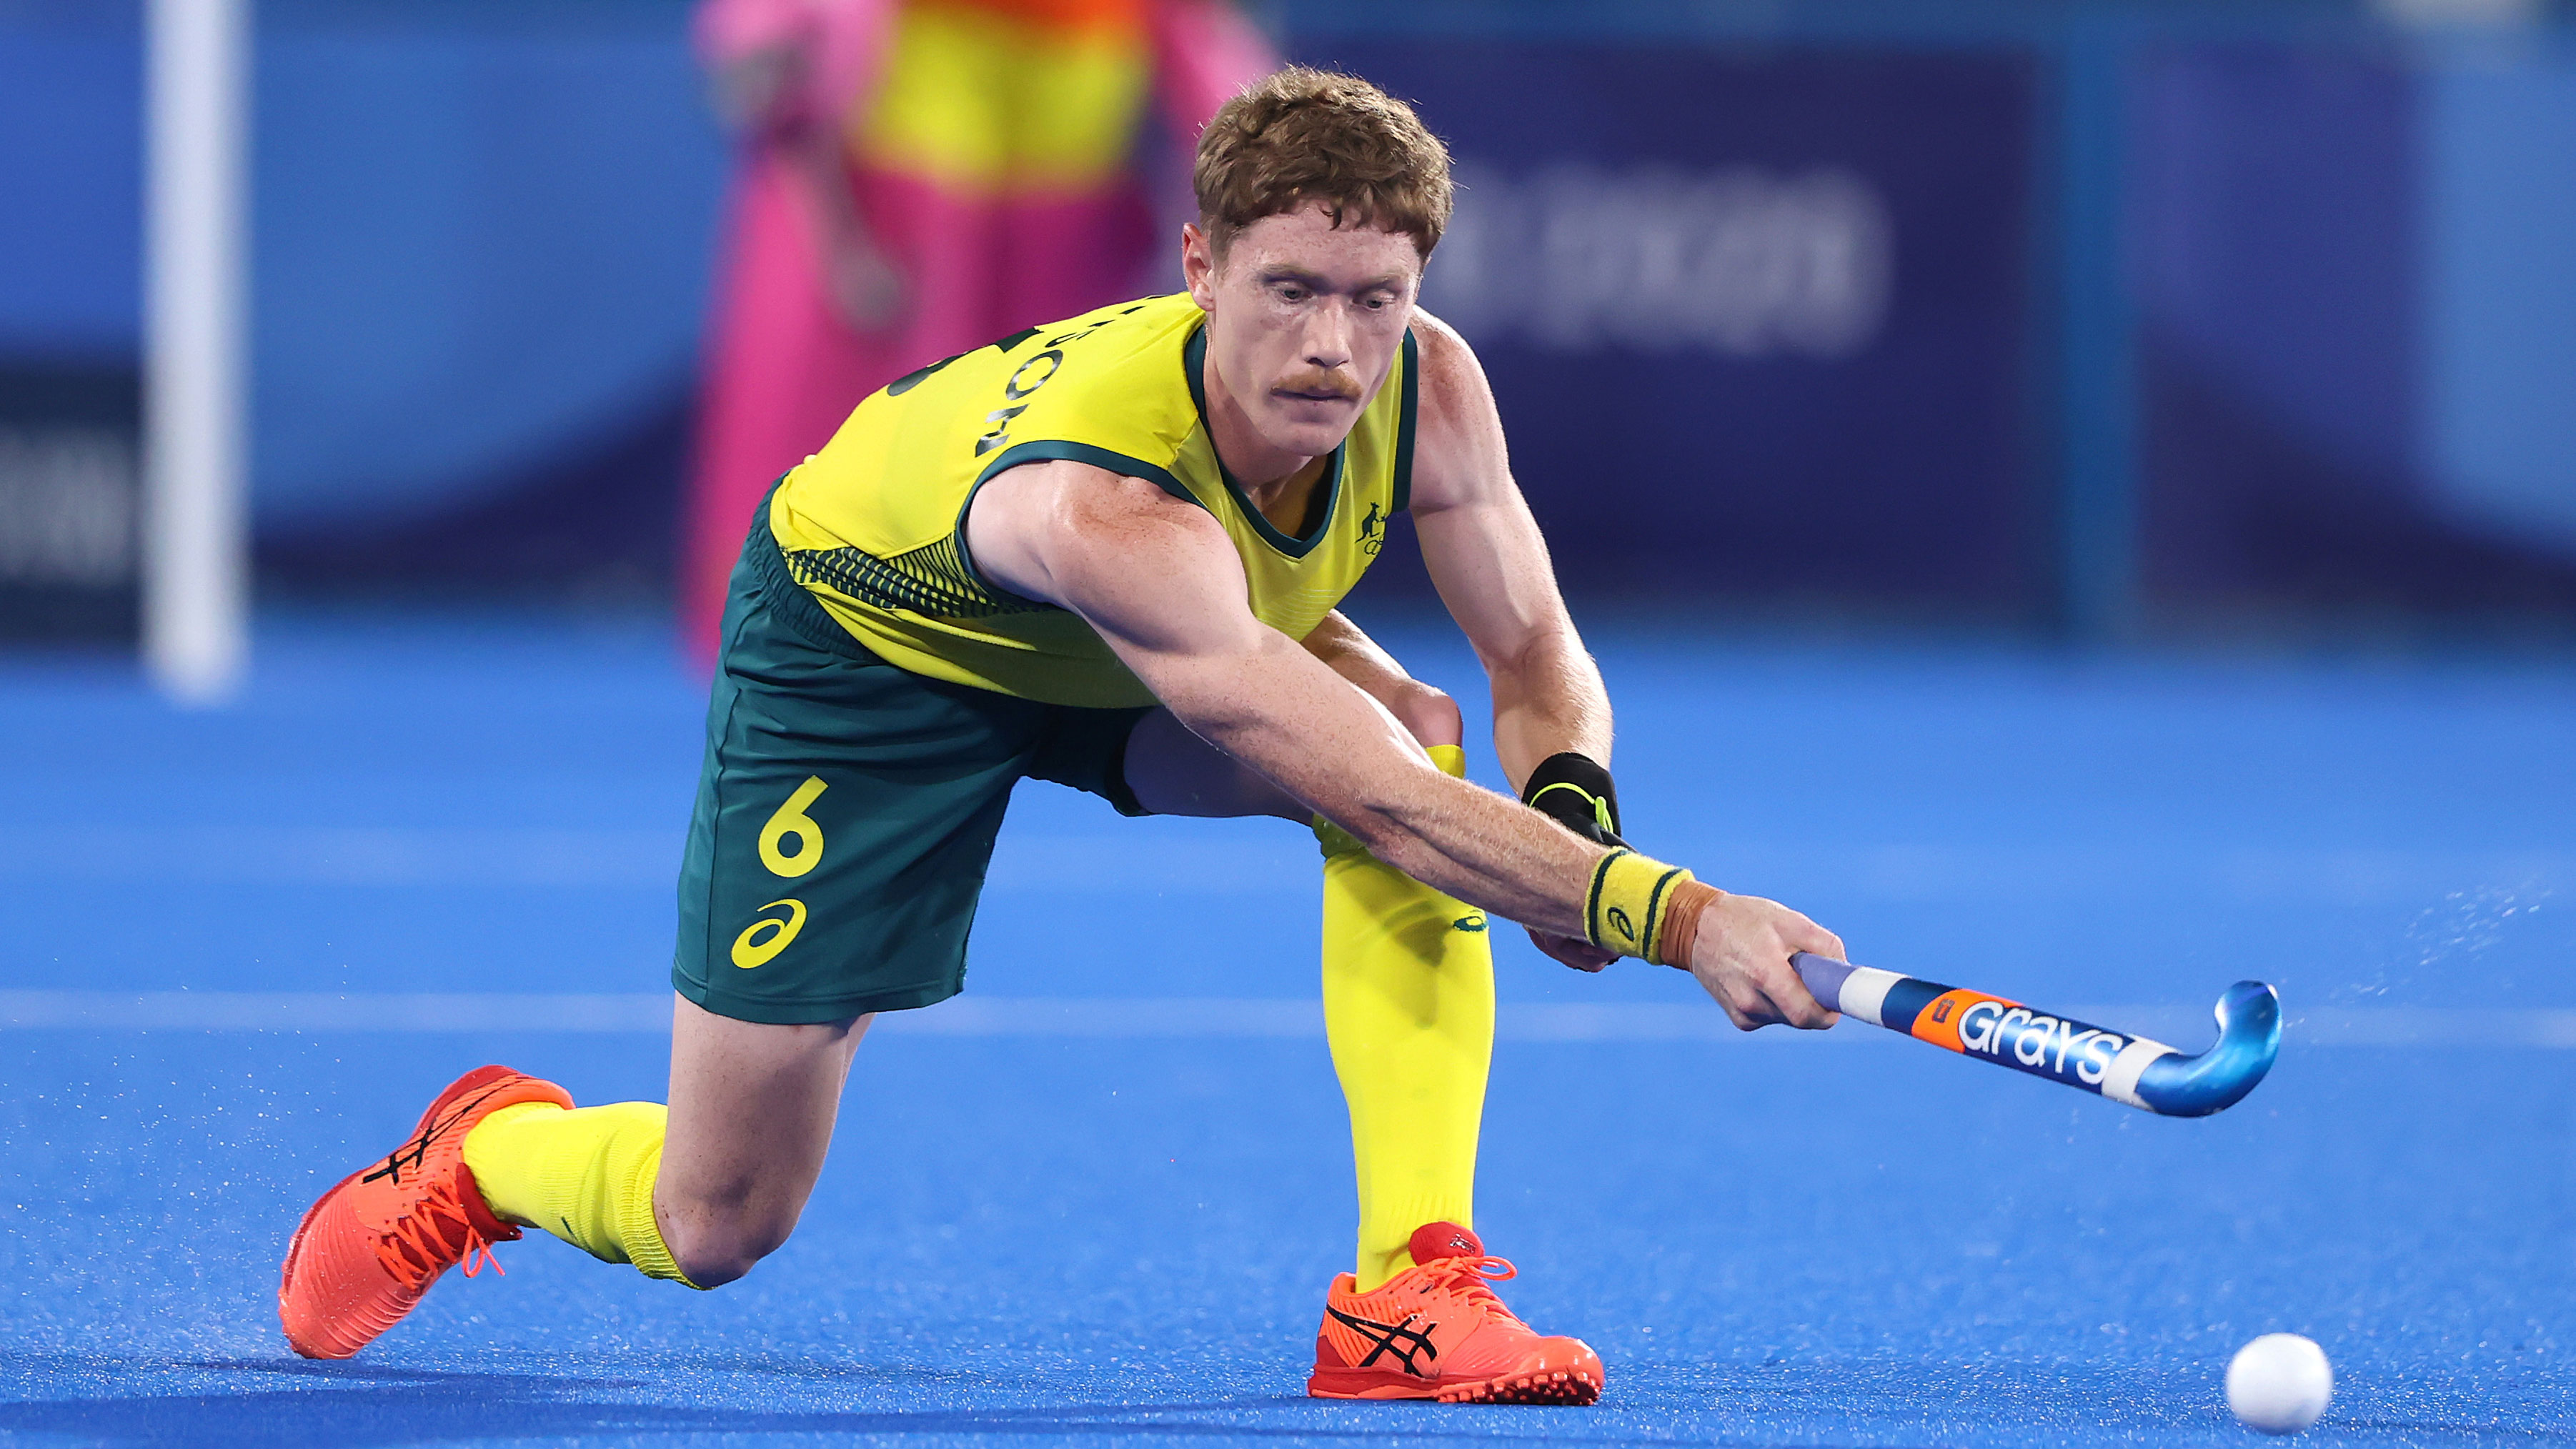 Australian field hockey player amputates part of finger to compete at Paris Olympics